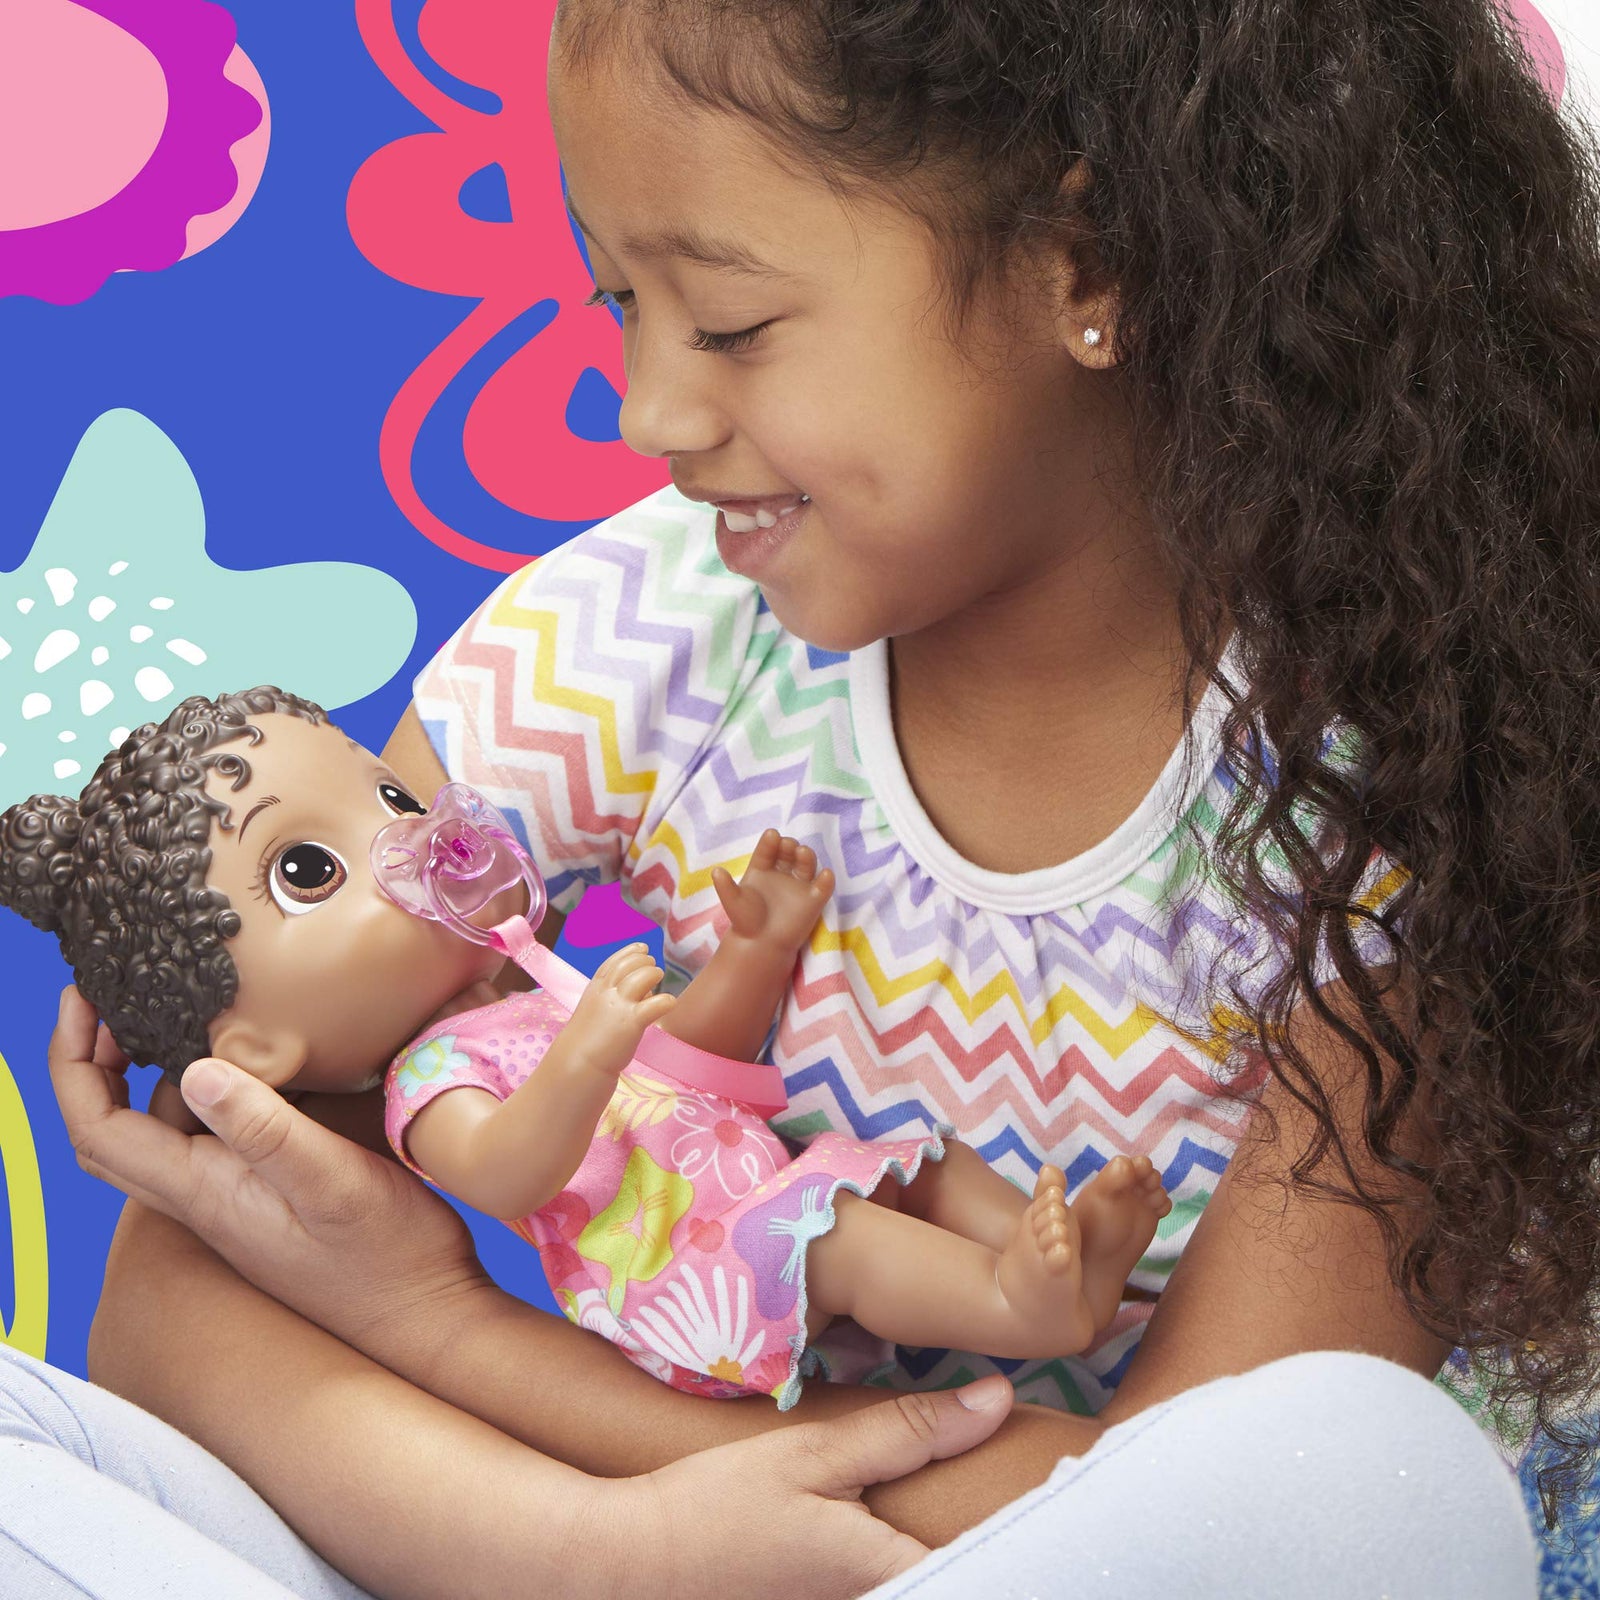 Baby Alive Baby Lil Sounds: Interactive Black Hair Baby Doll for Girls & Boys Ages 3 & Up, Makes 10 Sound Effects, Including Giggles, Cries, Baby Doll with Pacifier